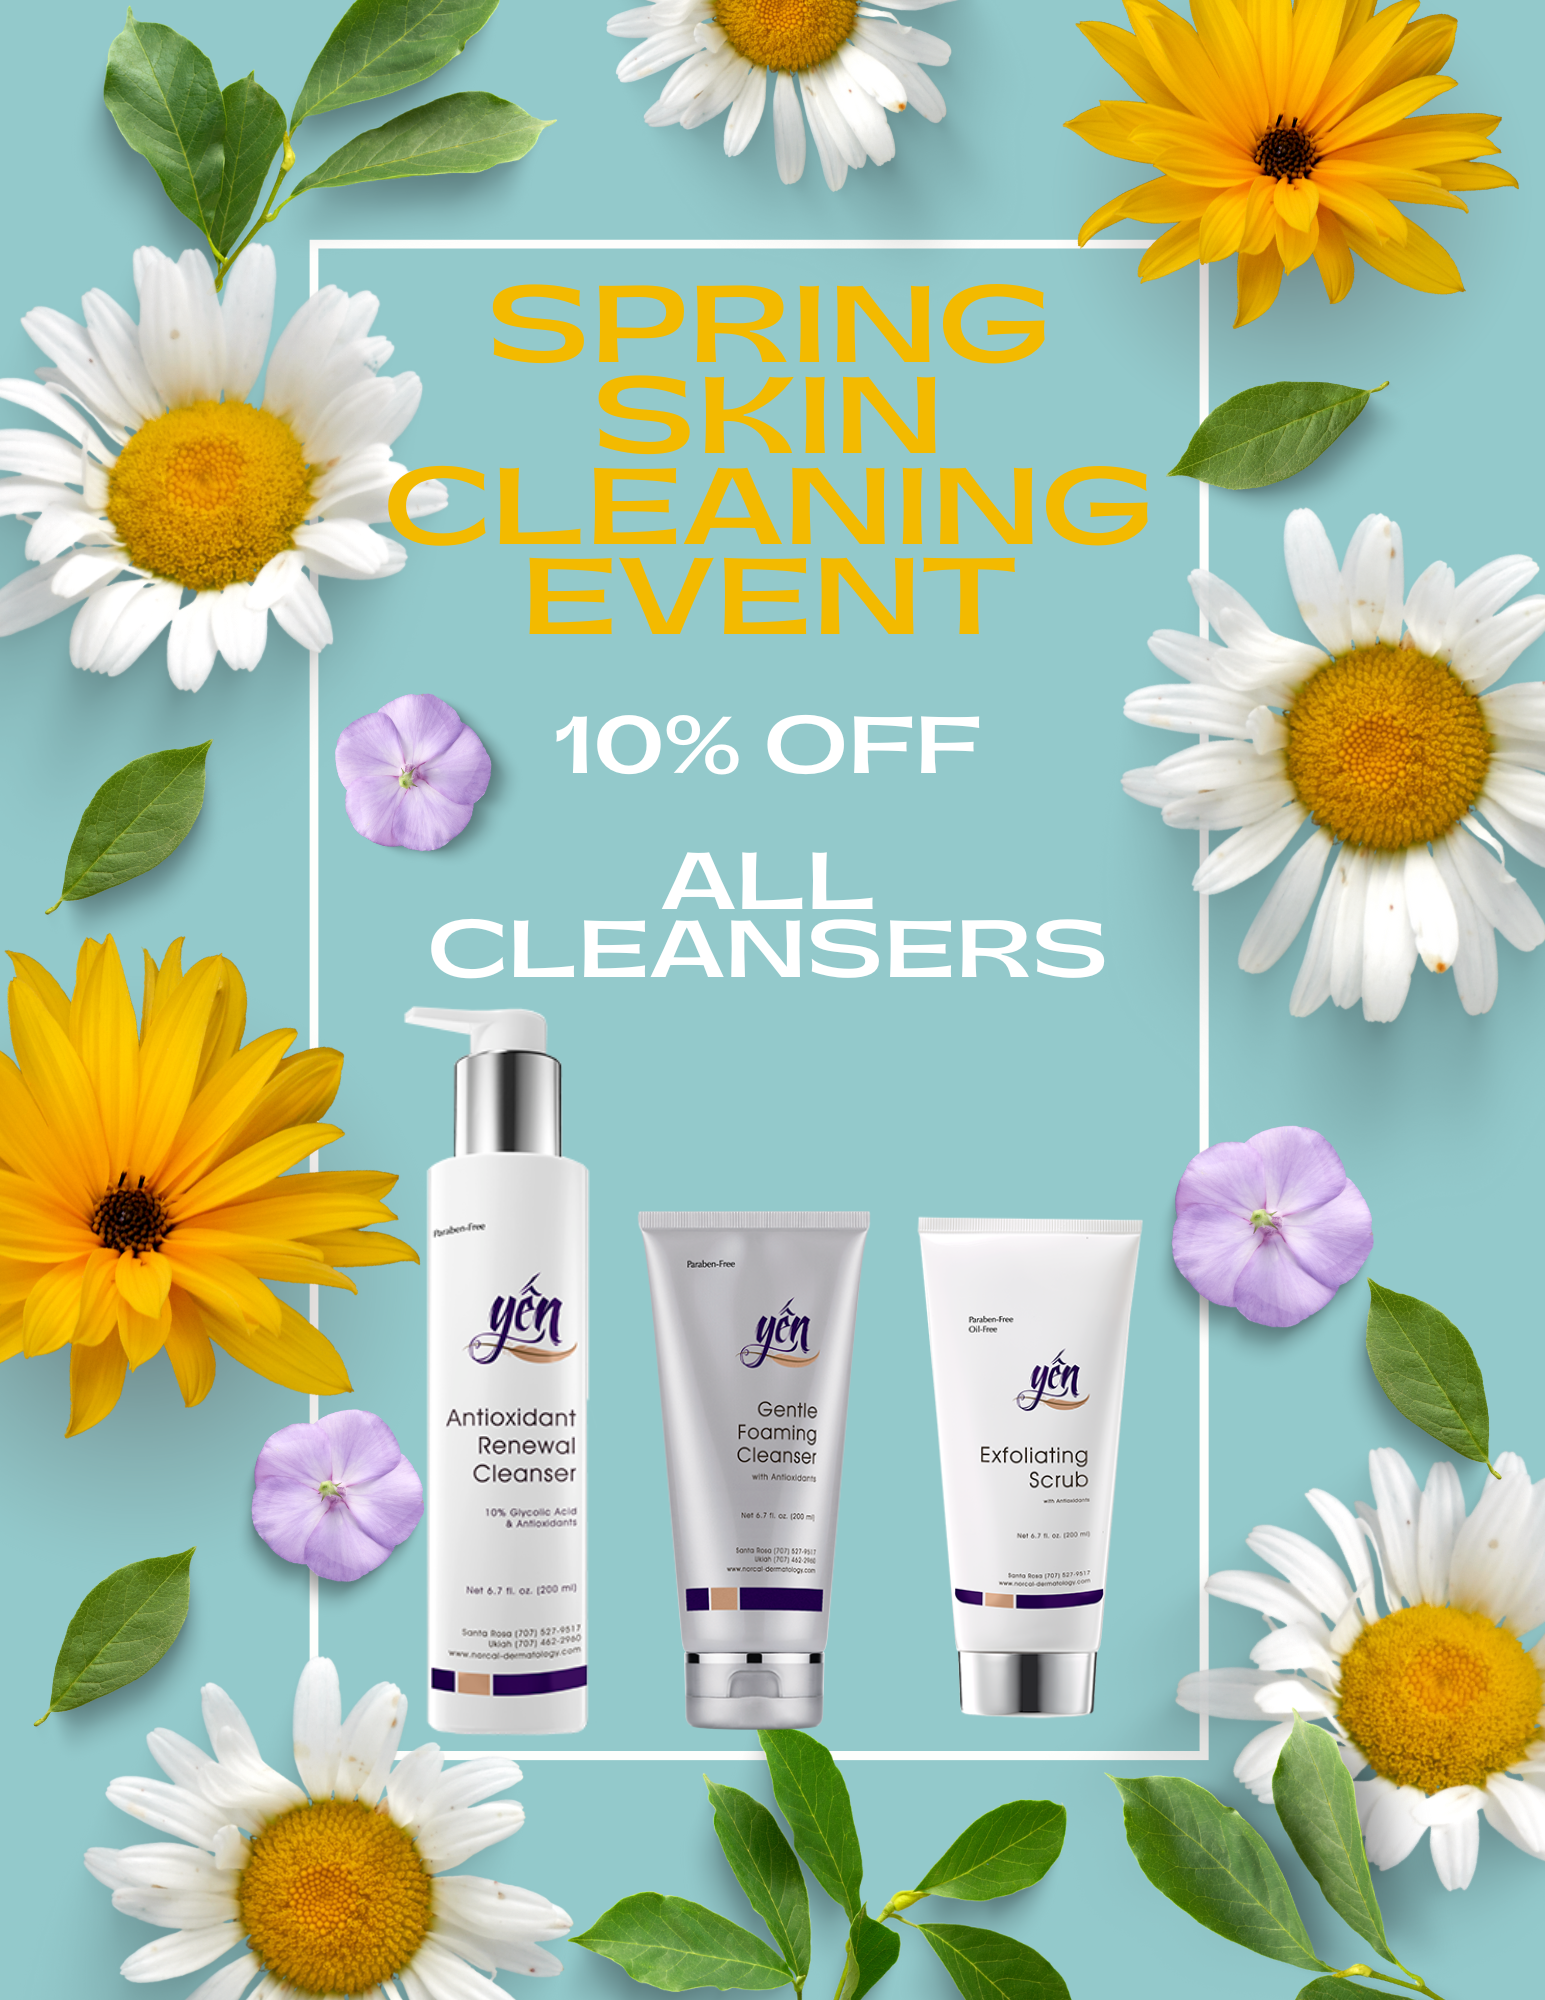 SPRING CLEAN 10% OFF CLEANSERS